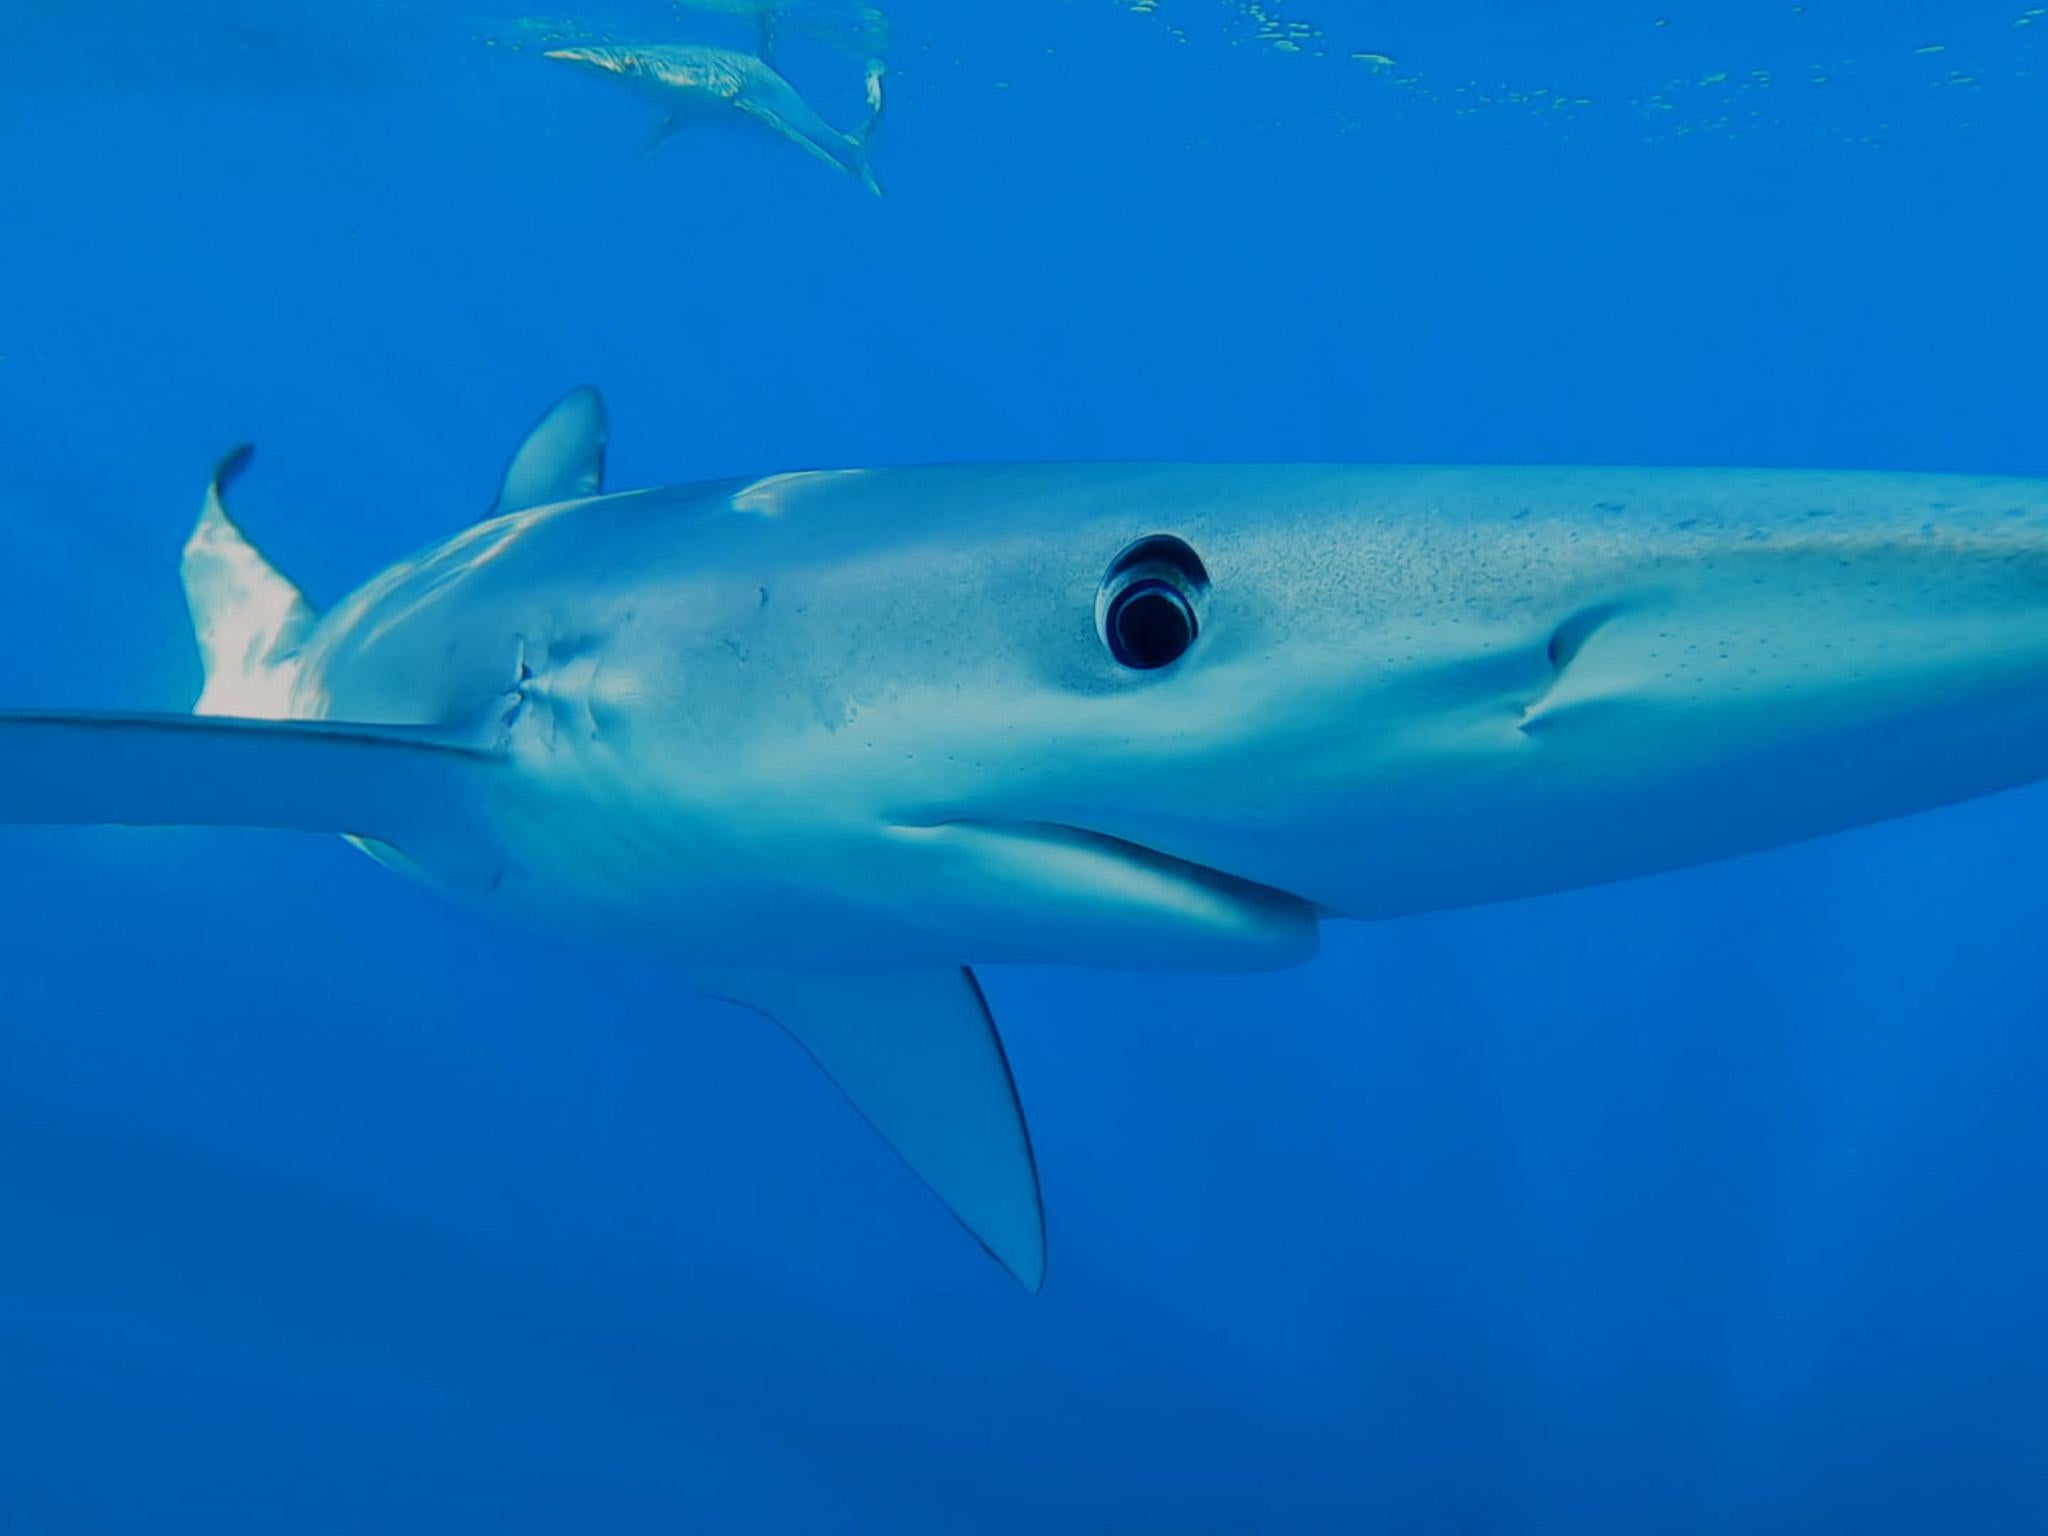 Pictured, stock image of a tintorera, known as a blue shark